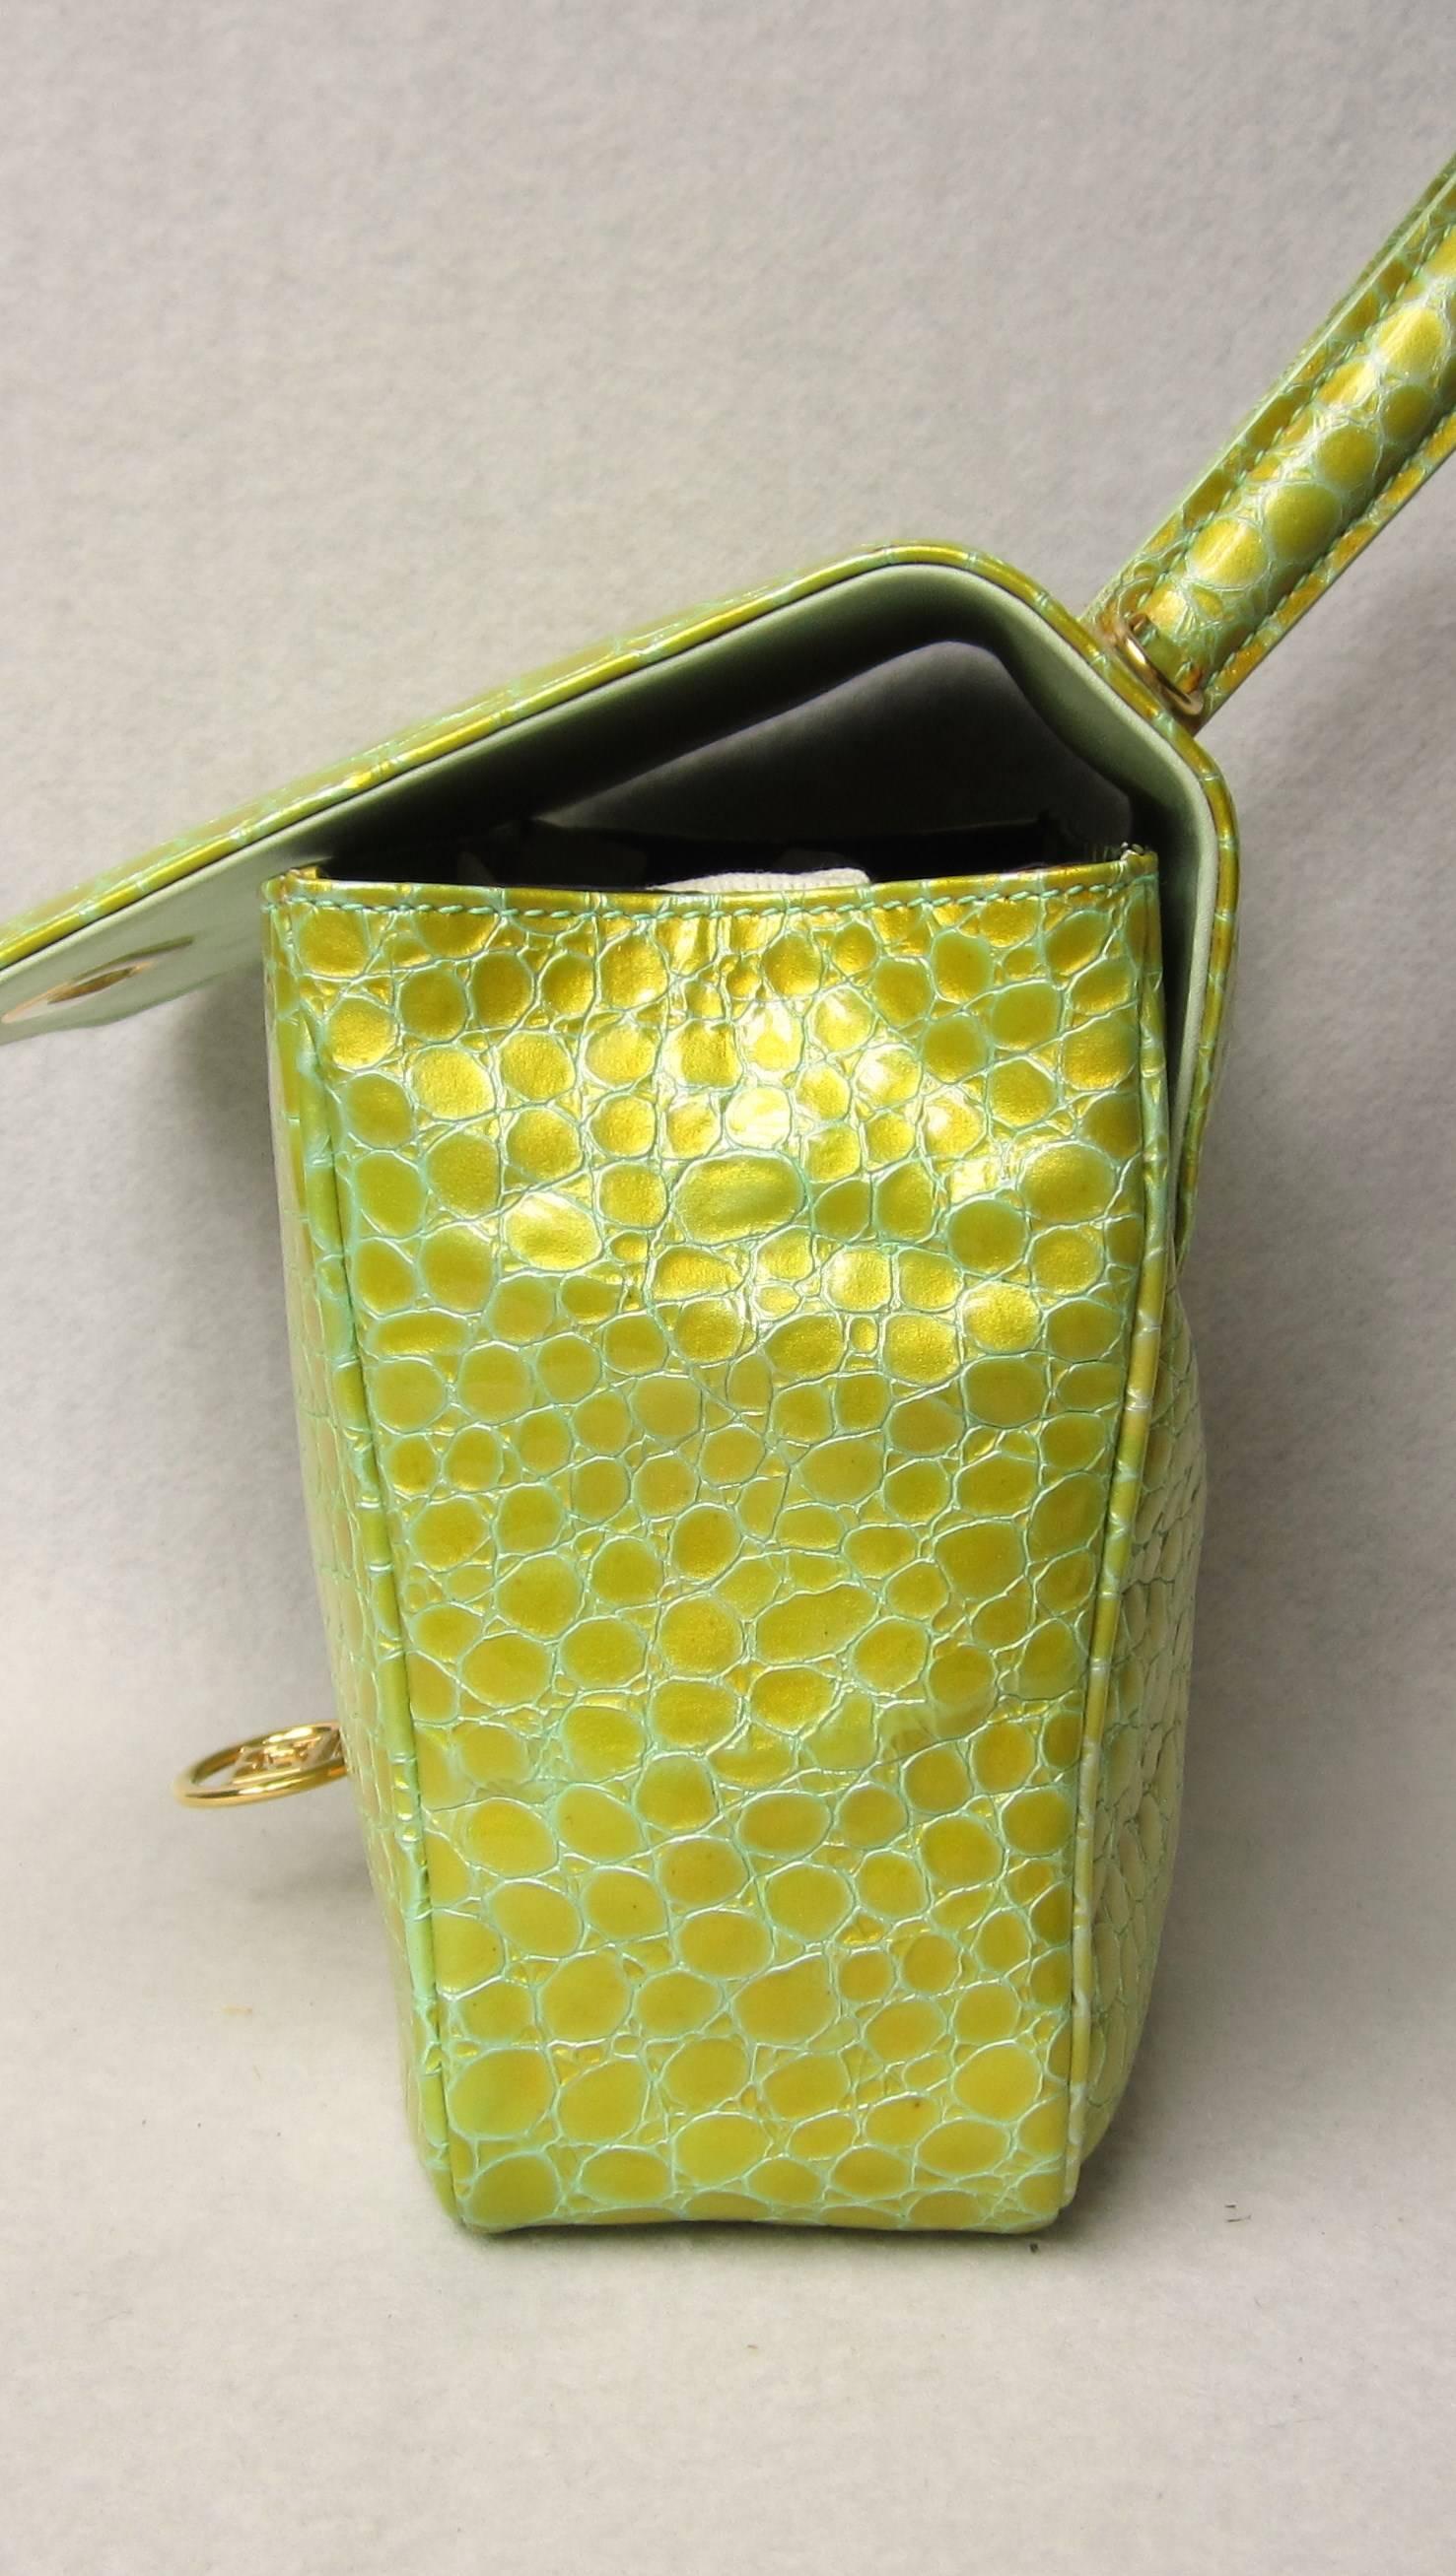 Women's 1990s Lime Green Escada Reptile Embossed Leather Hand bag New, Never Used 